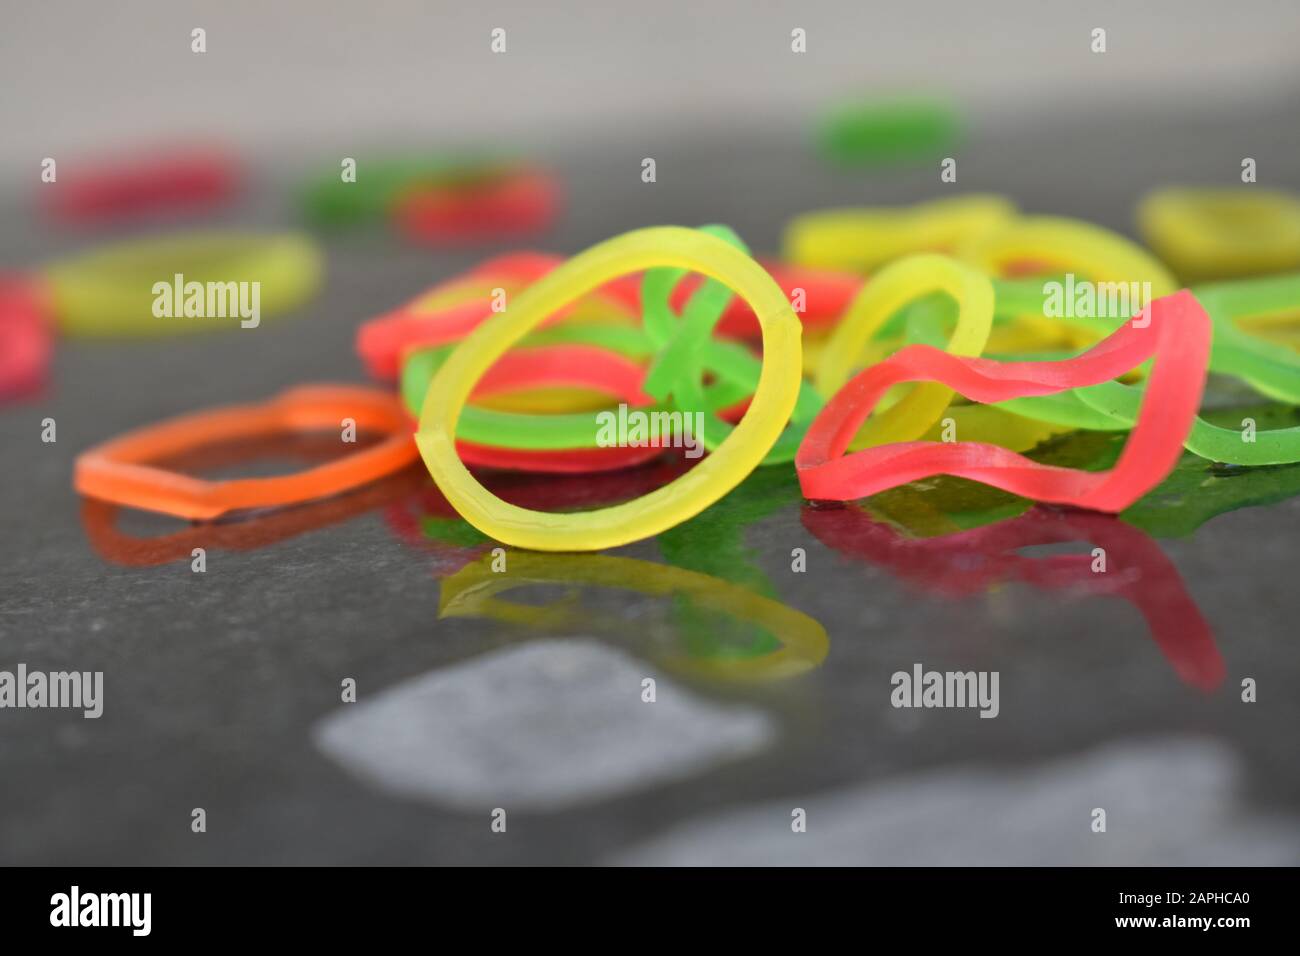 Colorful rubber bands in black background. Stock Photo